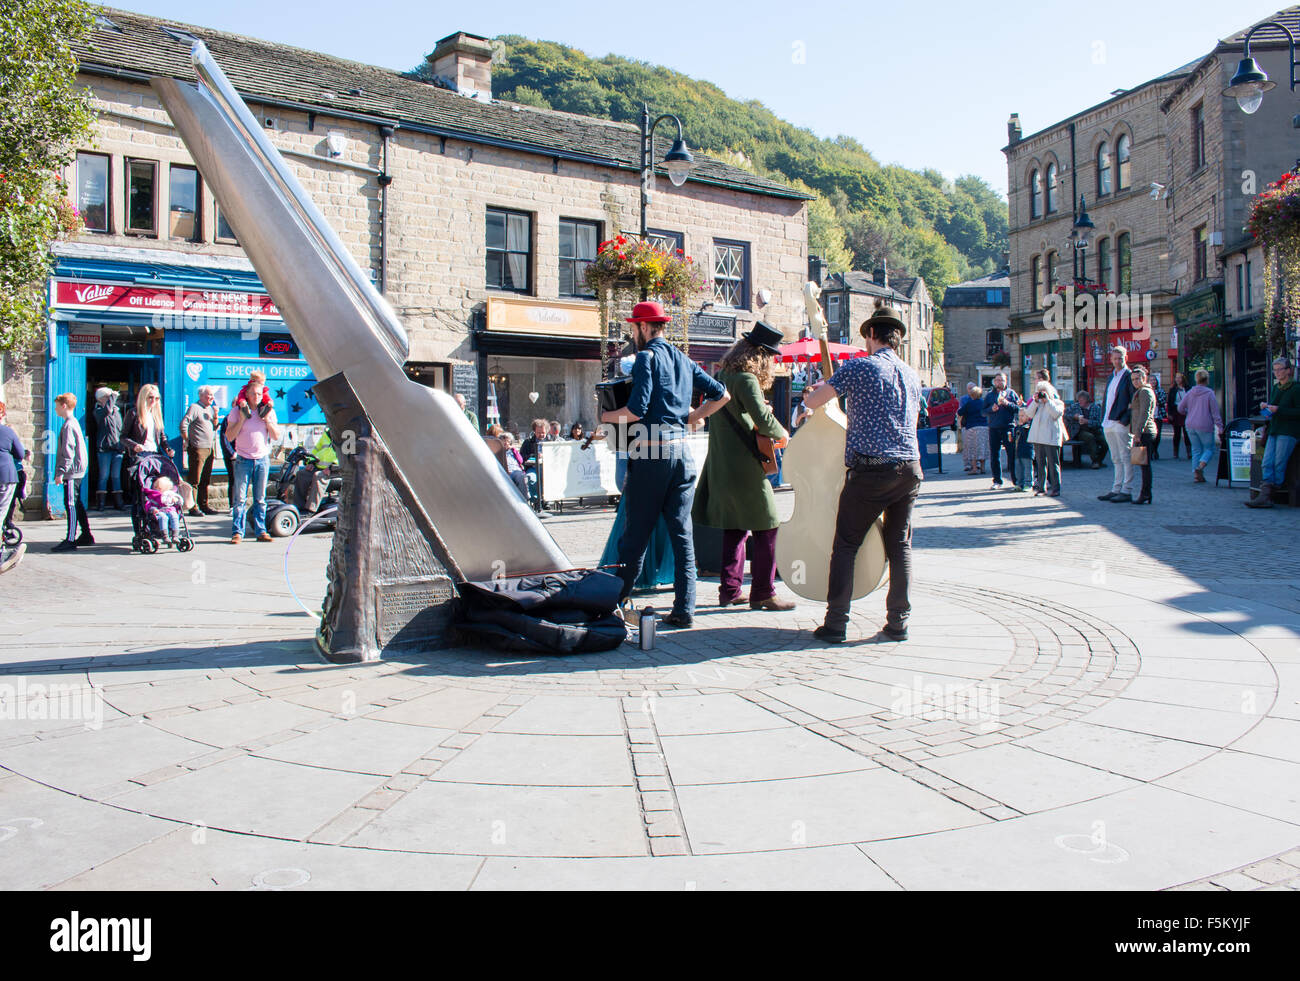 Street Performers at central Hebden Bridge, Calderdale, West Yorkshire, United Kingdom. Sunny day. Stock Photo